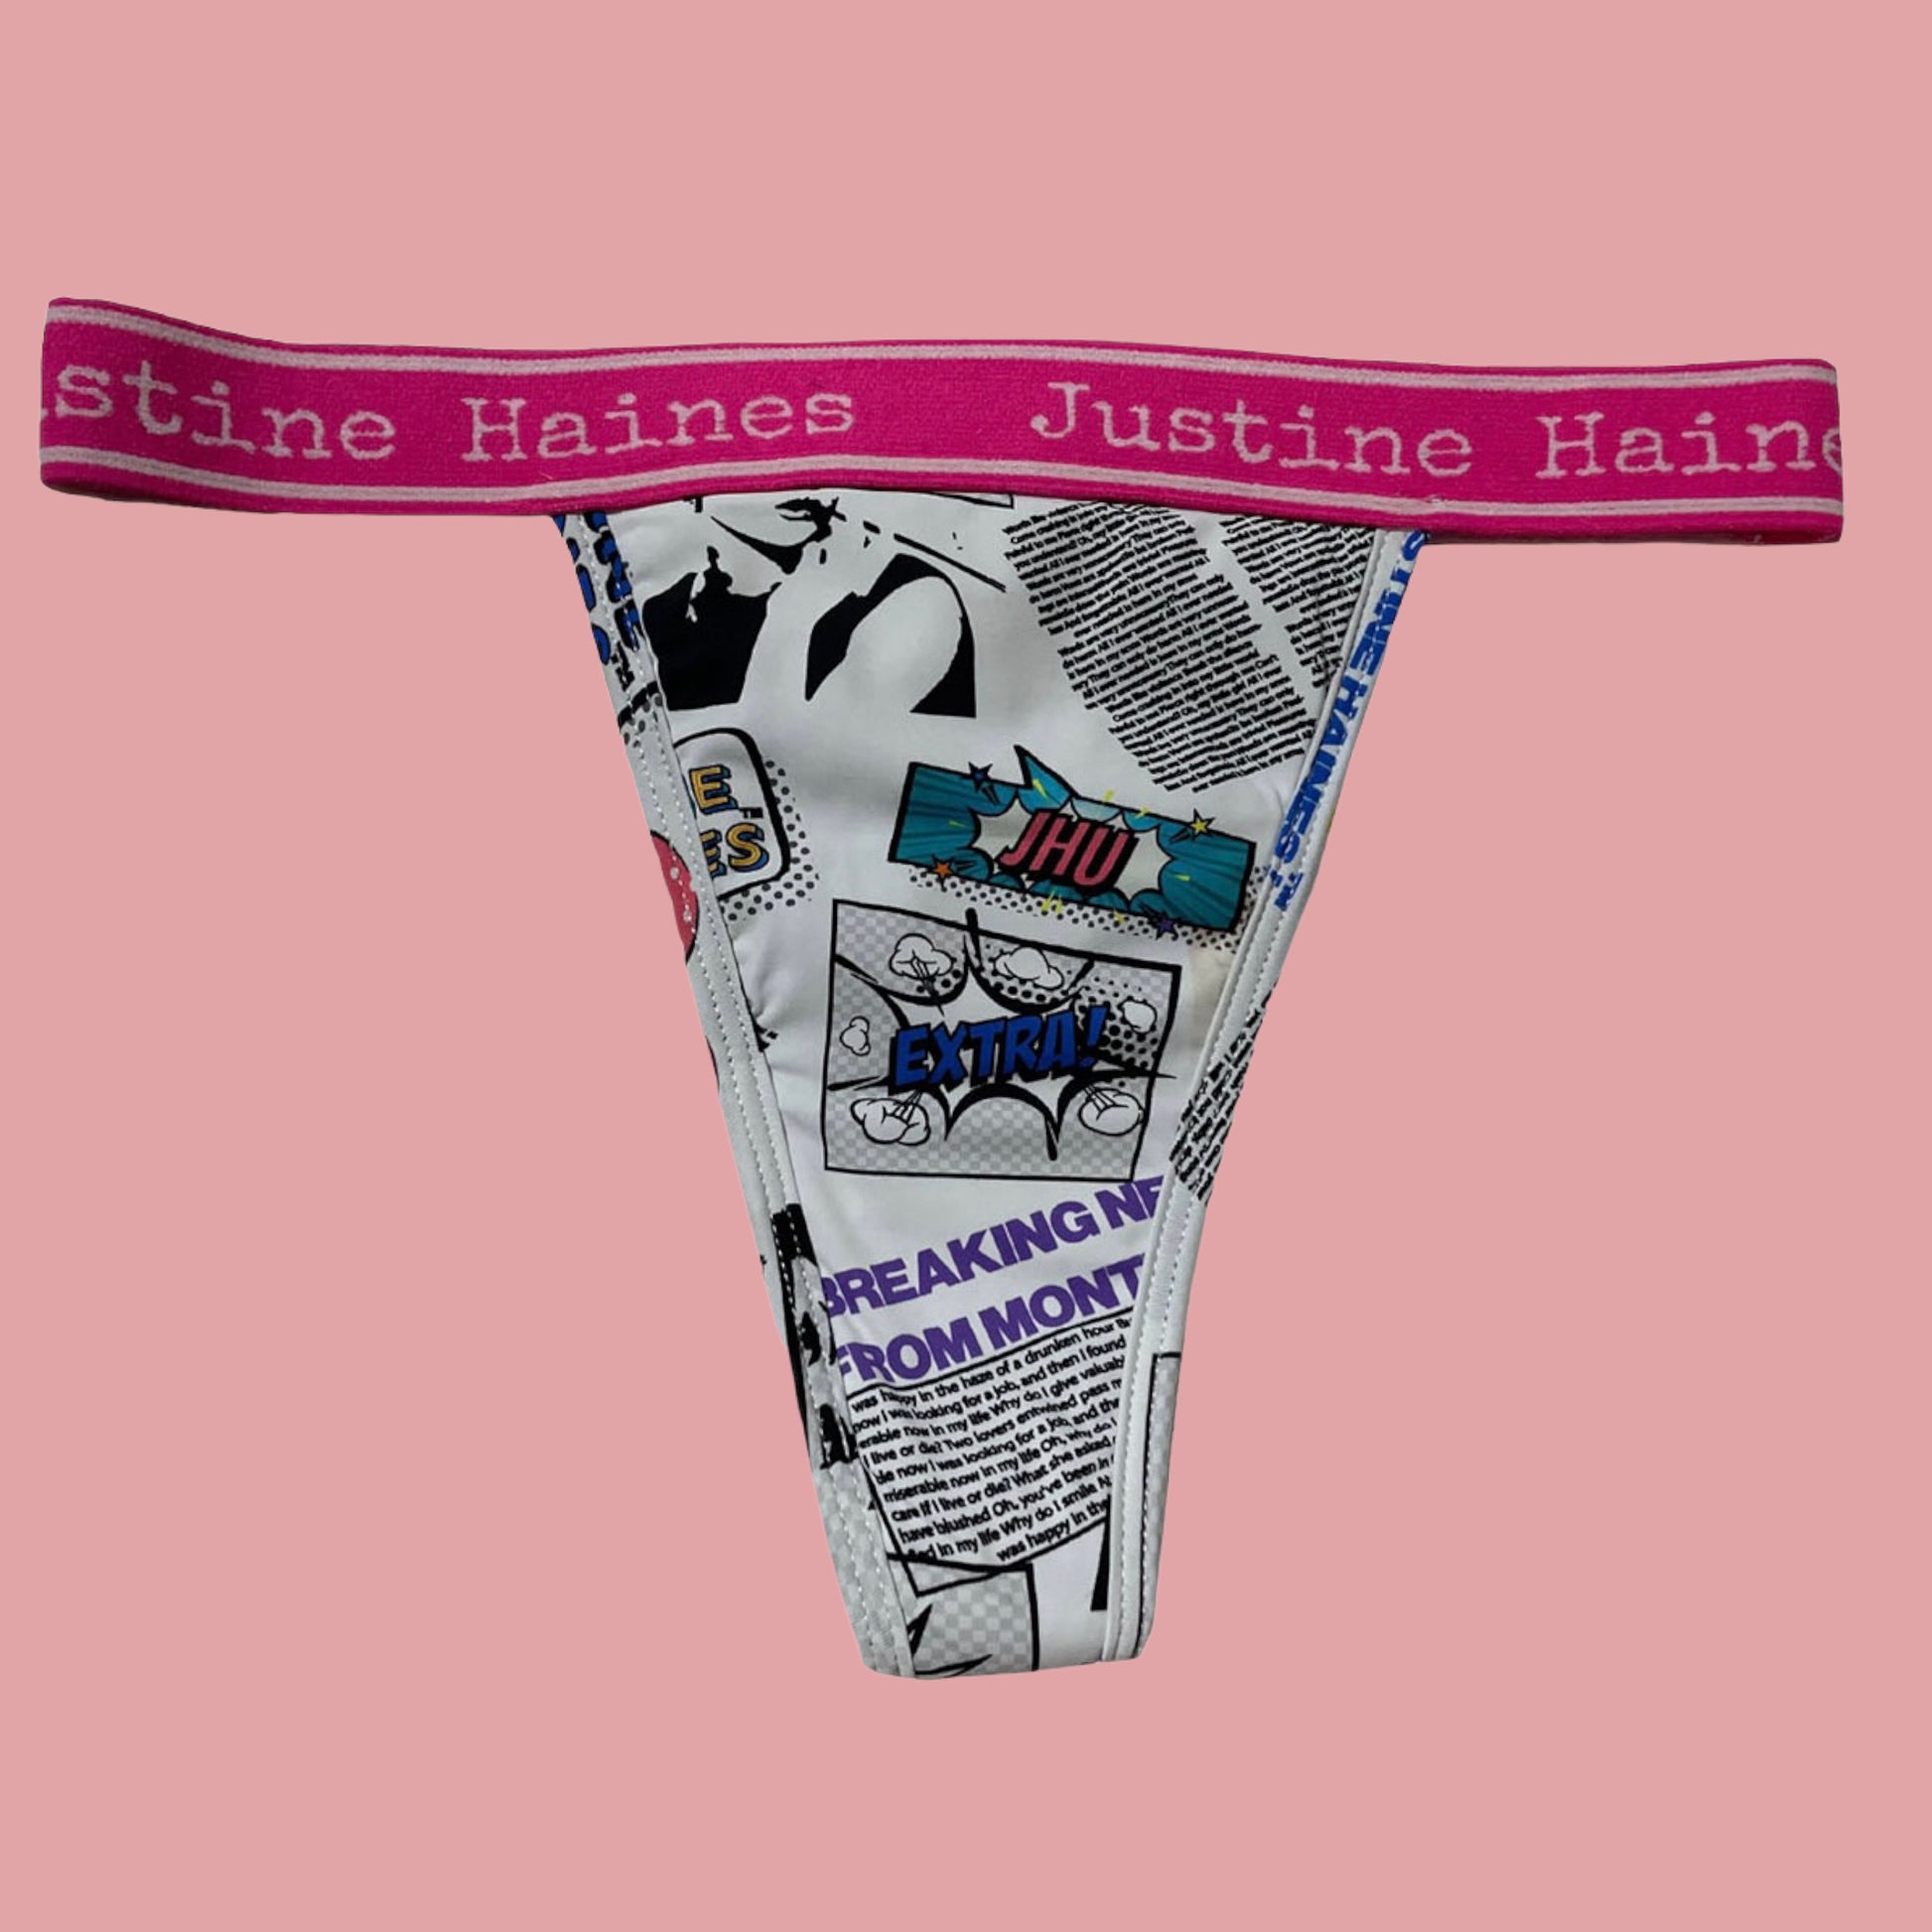 Wear Thongs on your Period! Fashion Newspaper – Justine Haines